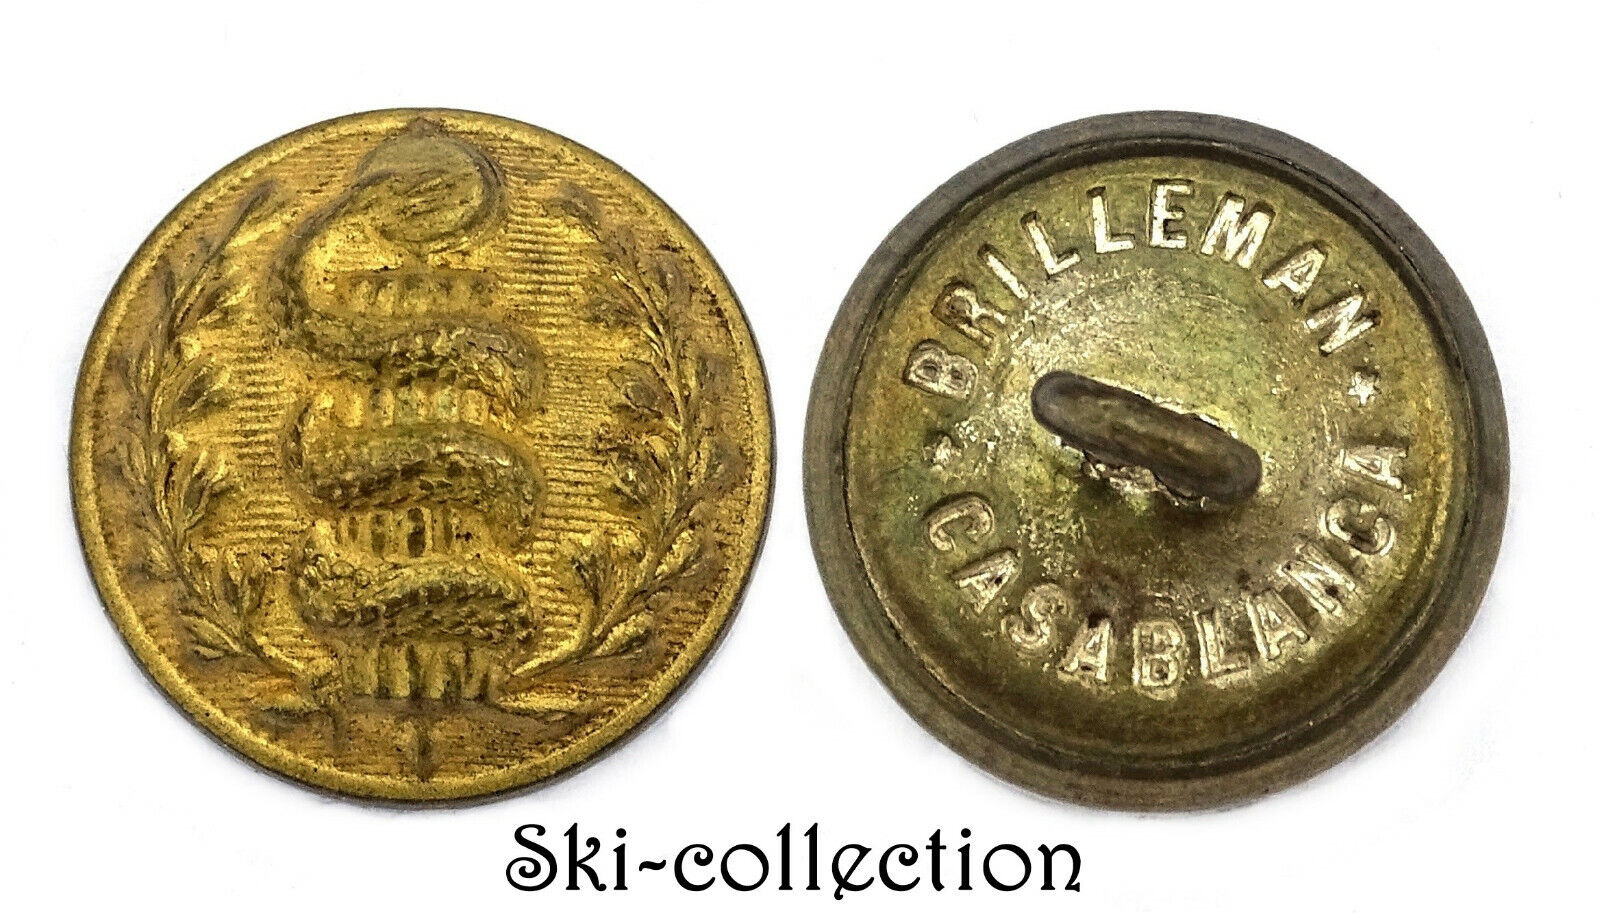 Health Service Officer Button, French Army in Morocco. CASABLANCA. 16mm